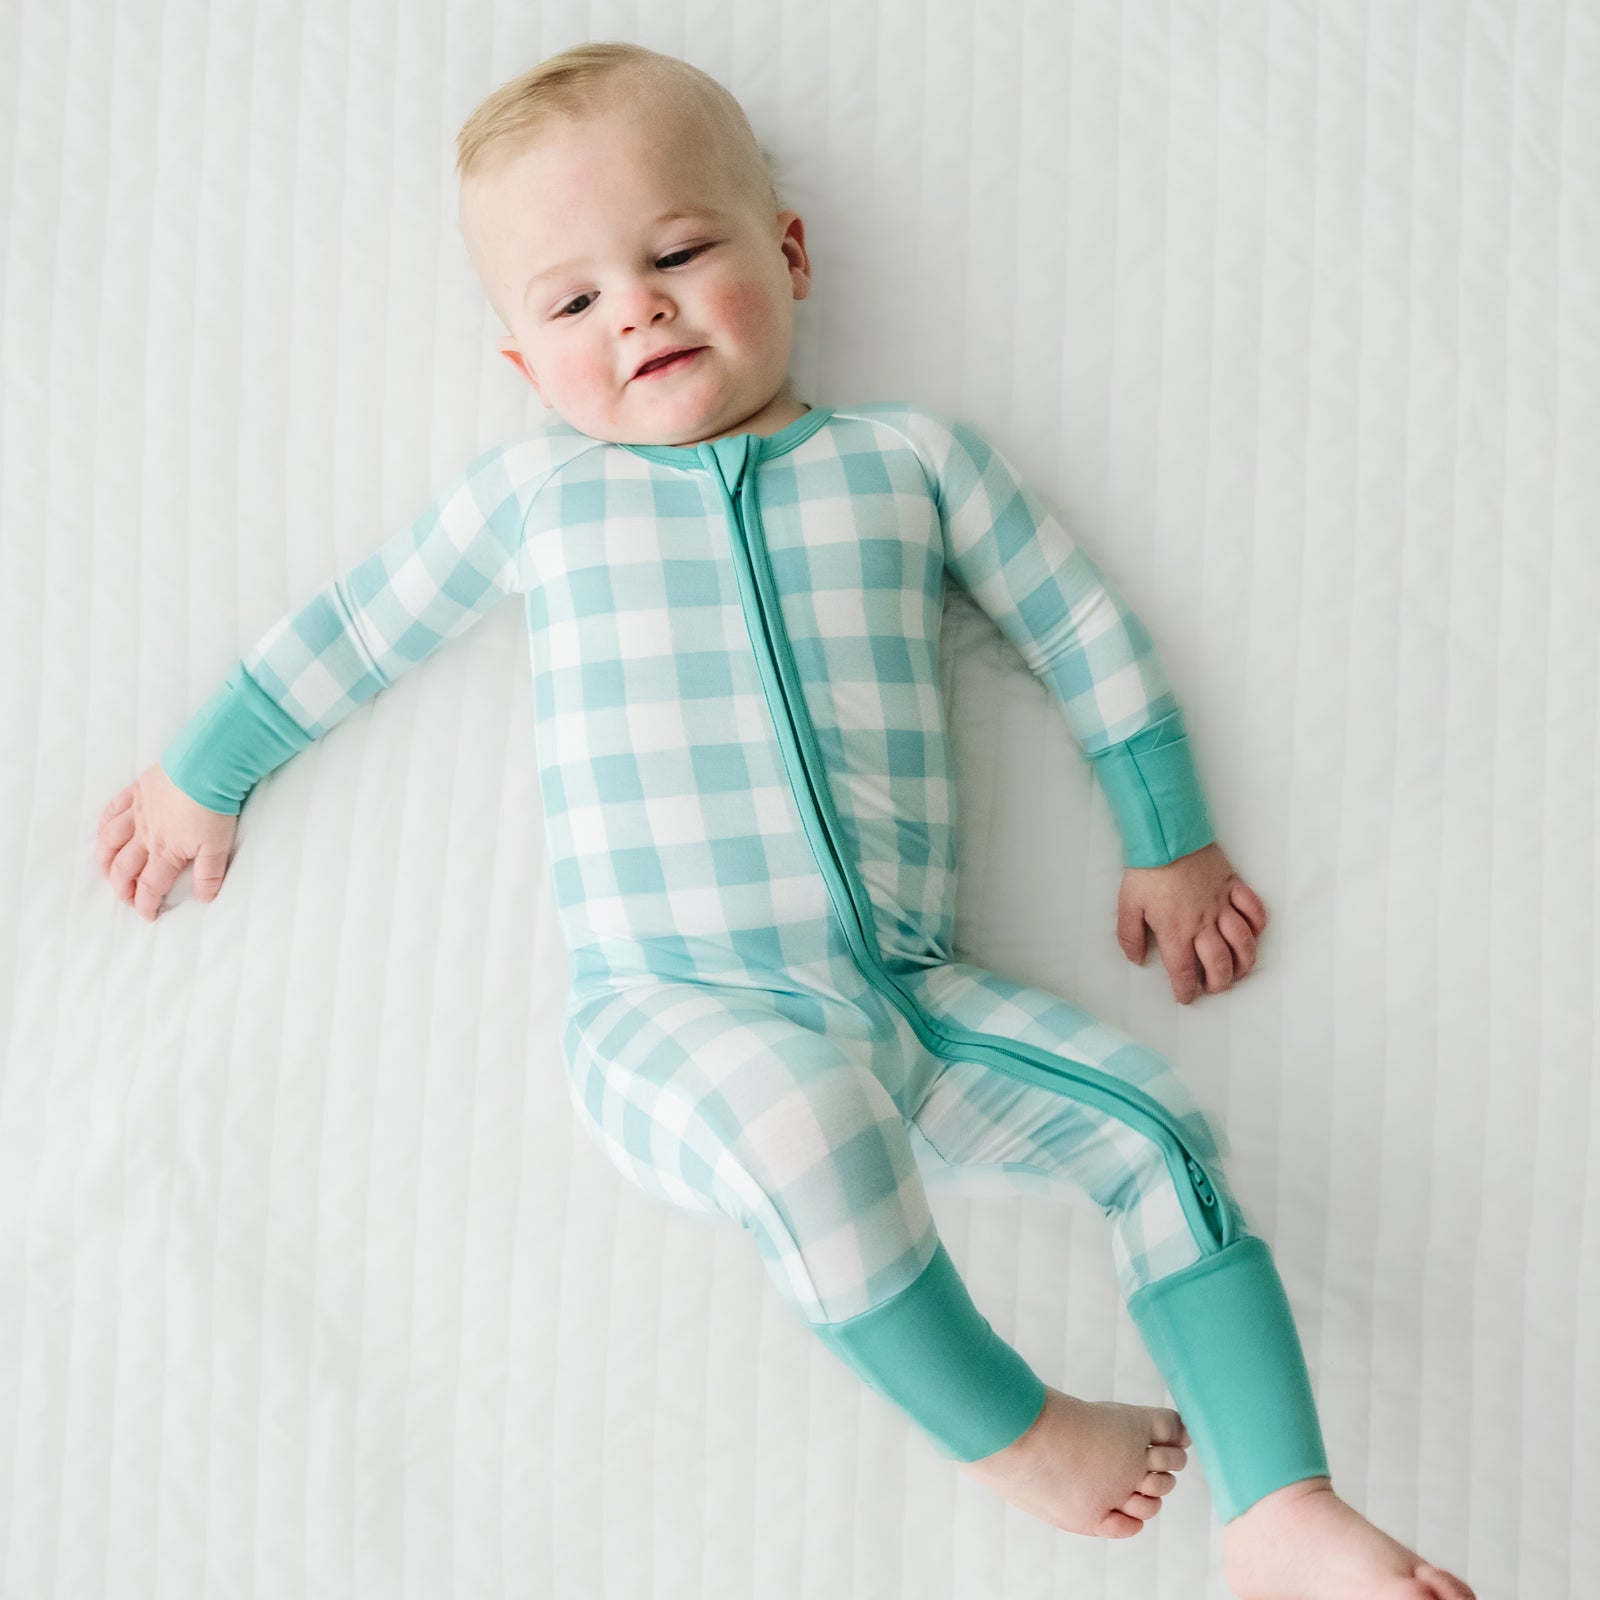 Alternate image of a child laying on a bed wearing a Aqua Gingham zippy